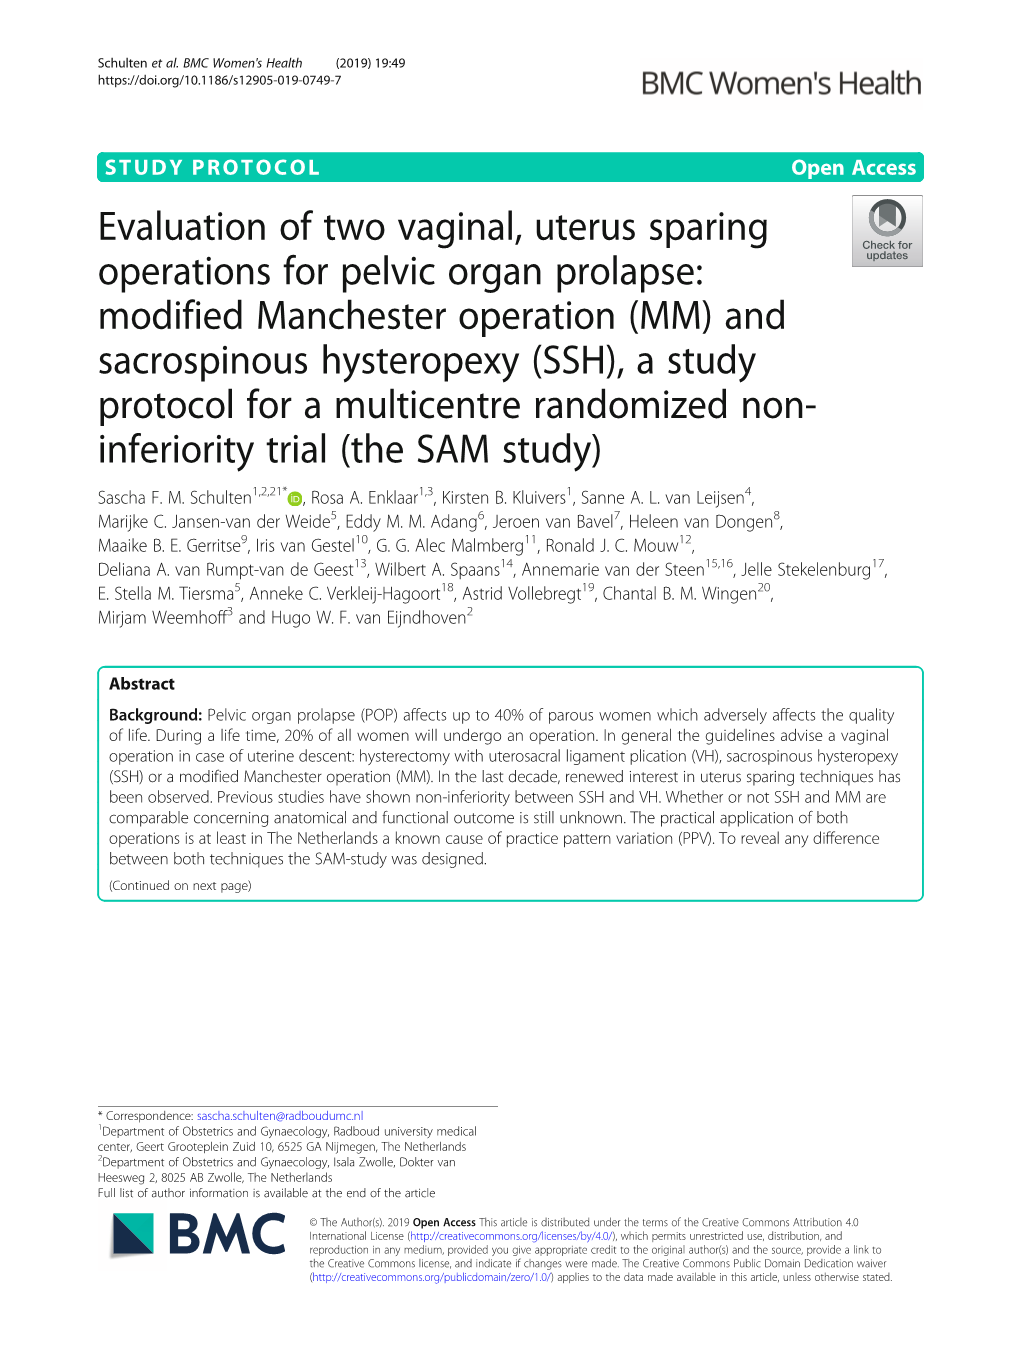 Evaluation of Two Vaginal, Uterus Sparing Operations for Pelvic Organ Prolapse